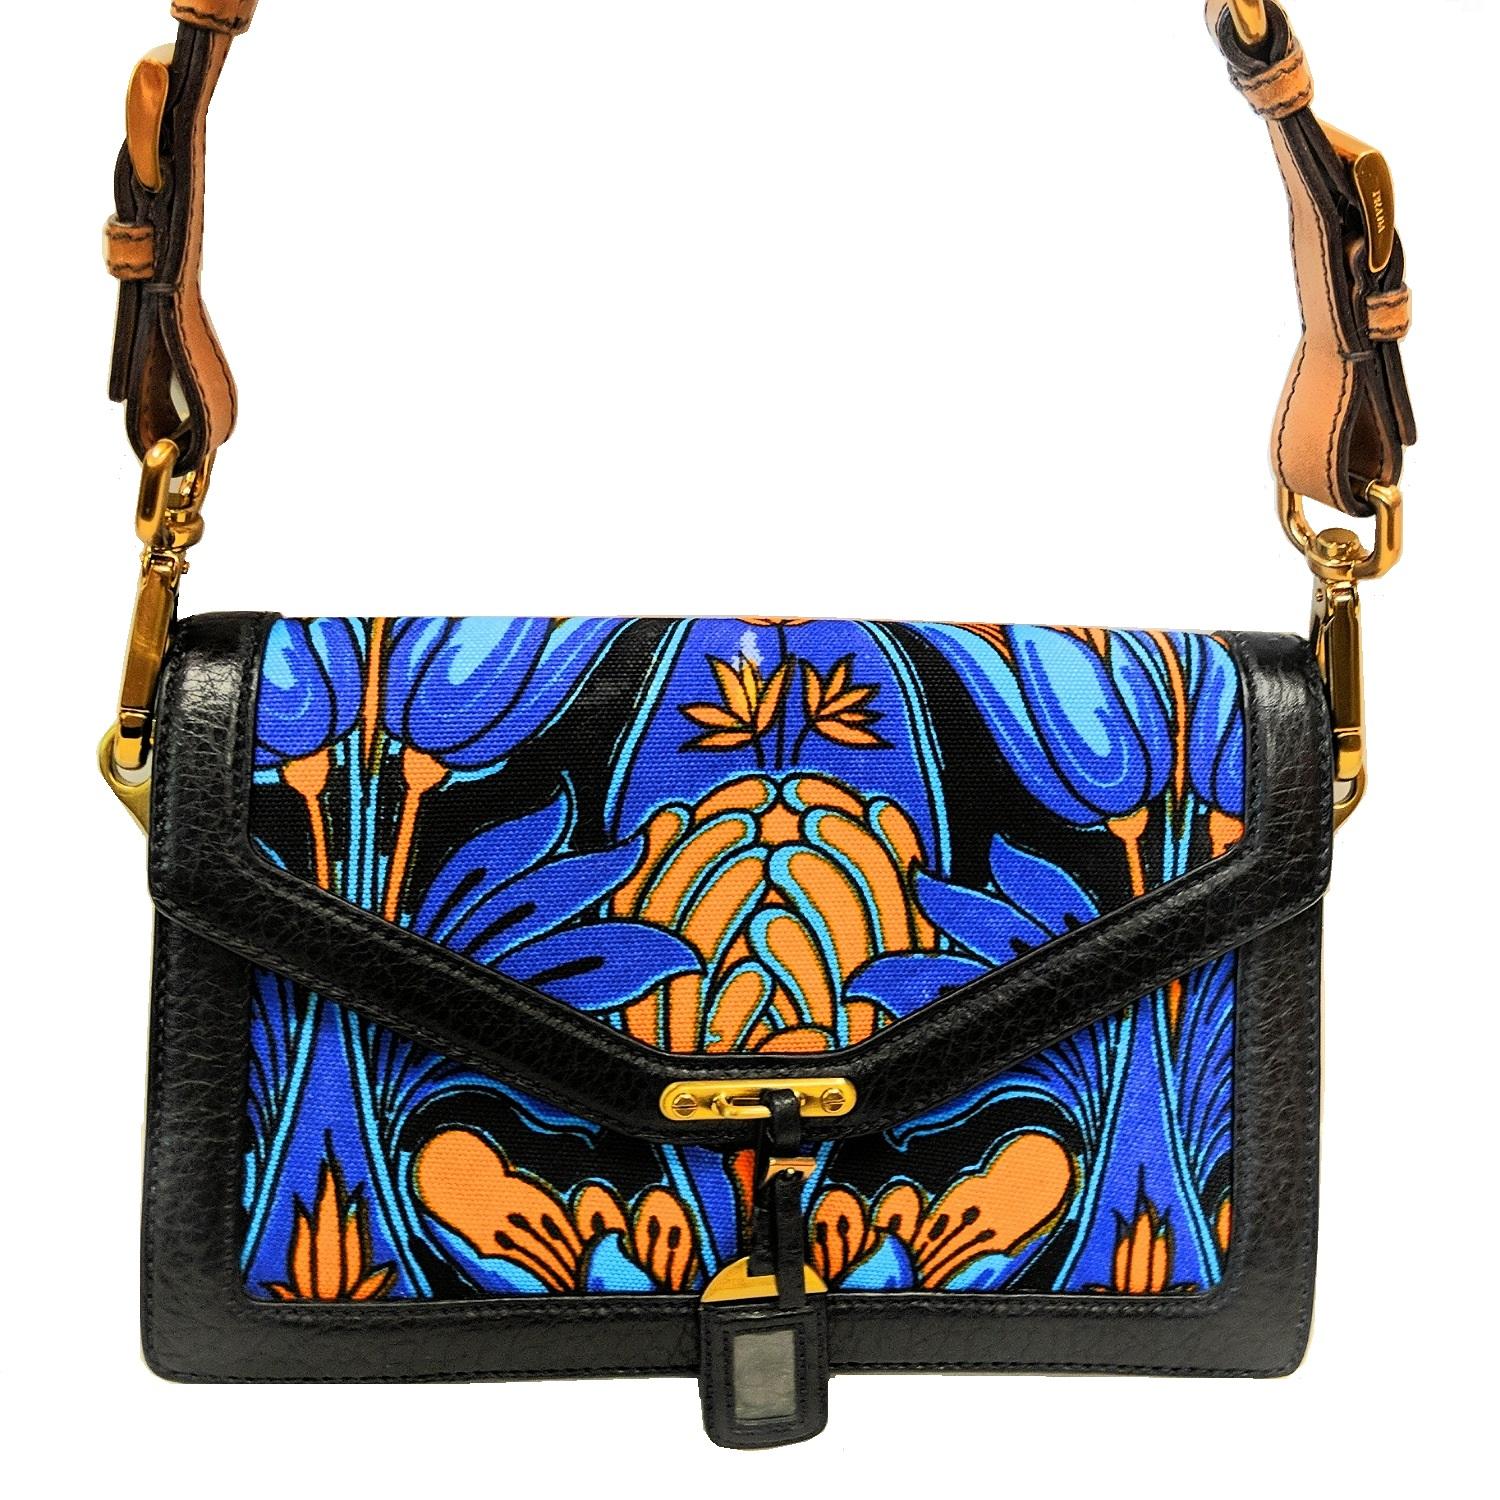 Prada multicolored cloth tropical motif print and black leather trimming flap bag with detachable light brown shoulder strap. Magnetic fastening with small black leather tag detail. 2 main layer: 1 layer with 2 slip compartments; 1 layer with 1 slip